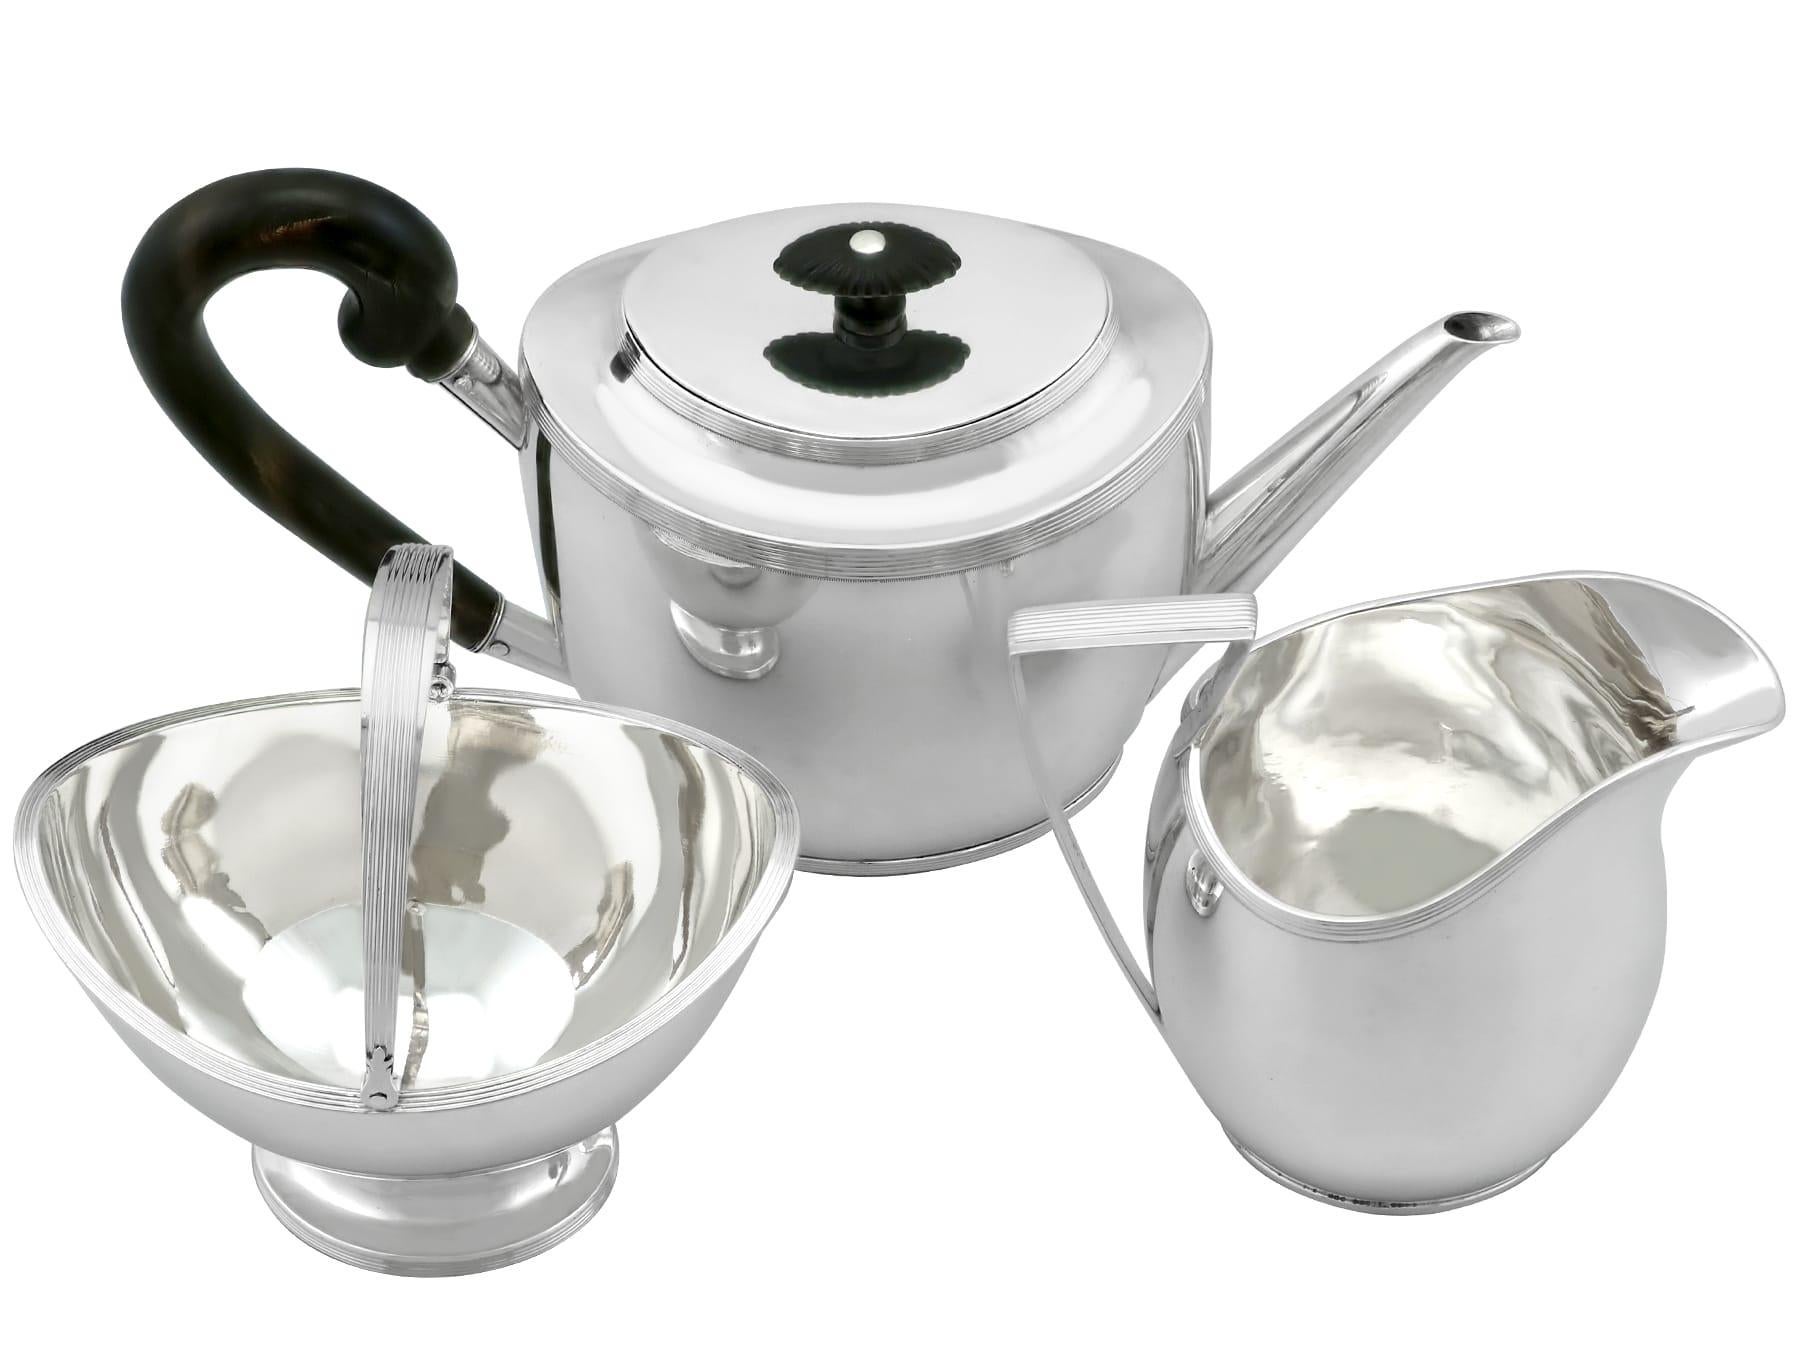 An exceptional, fine and impressive antique Dutch silver three piece tea service; part of our silver teaware collection

This exceptional antique Dutch silver tea set consists of a teapot, cream jug and sugar basket.

Each piece of this antique